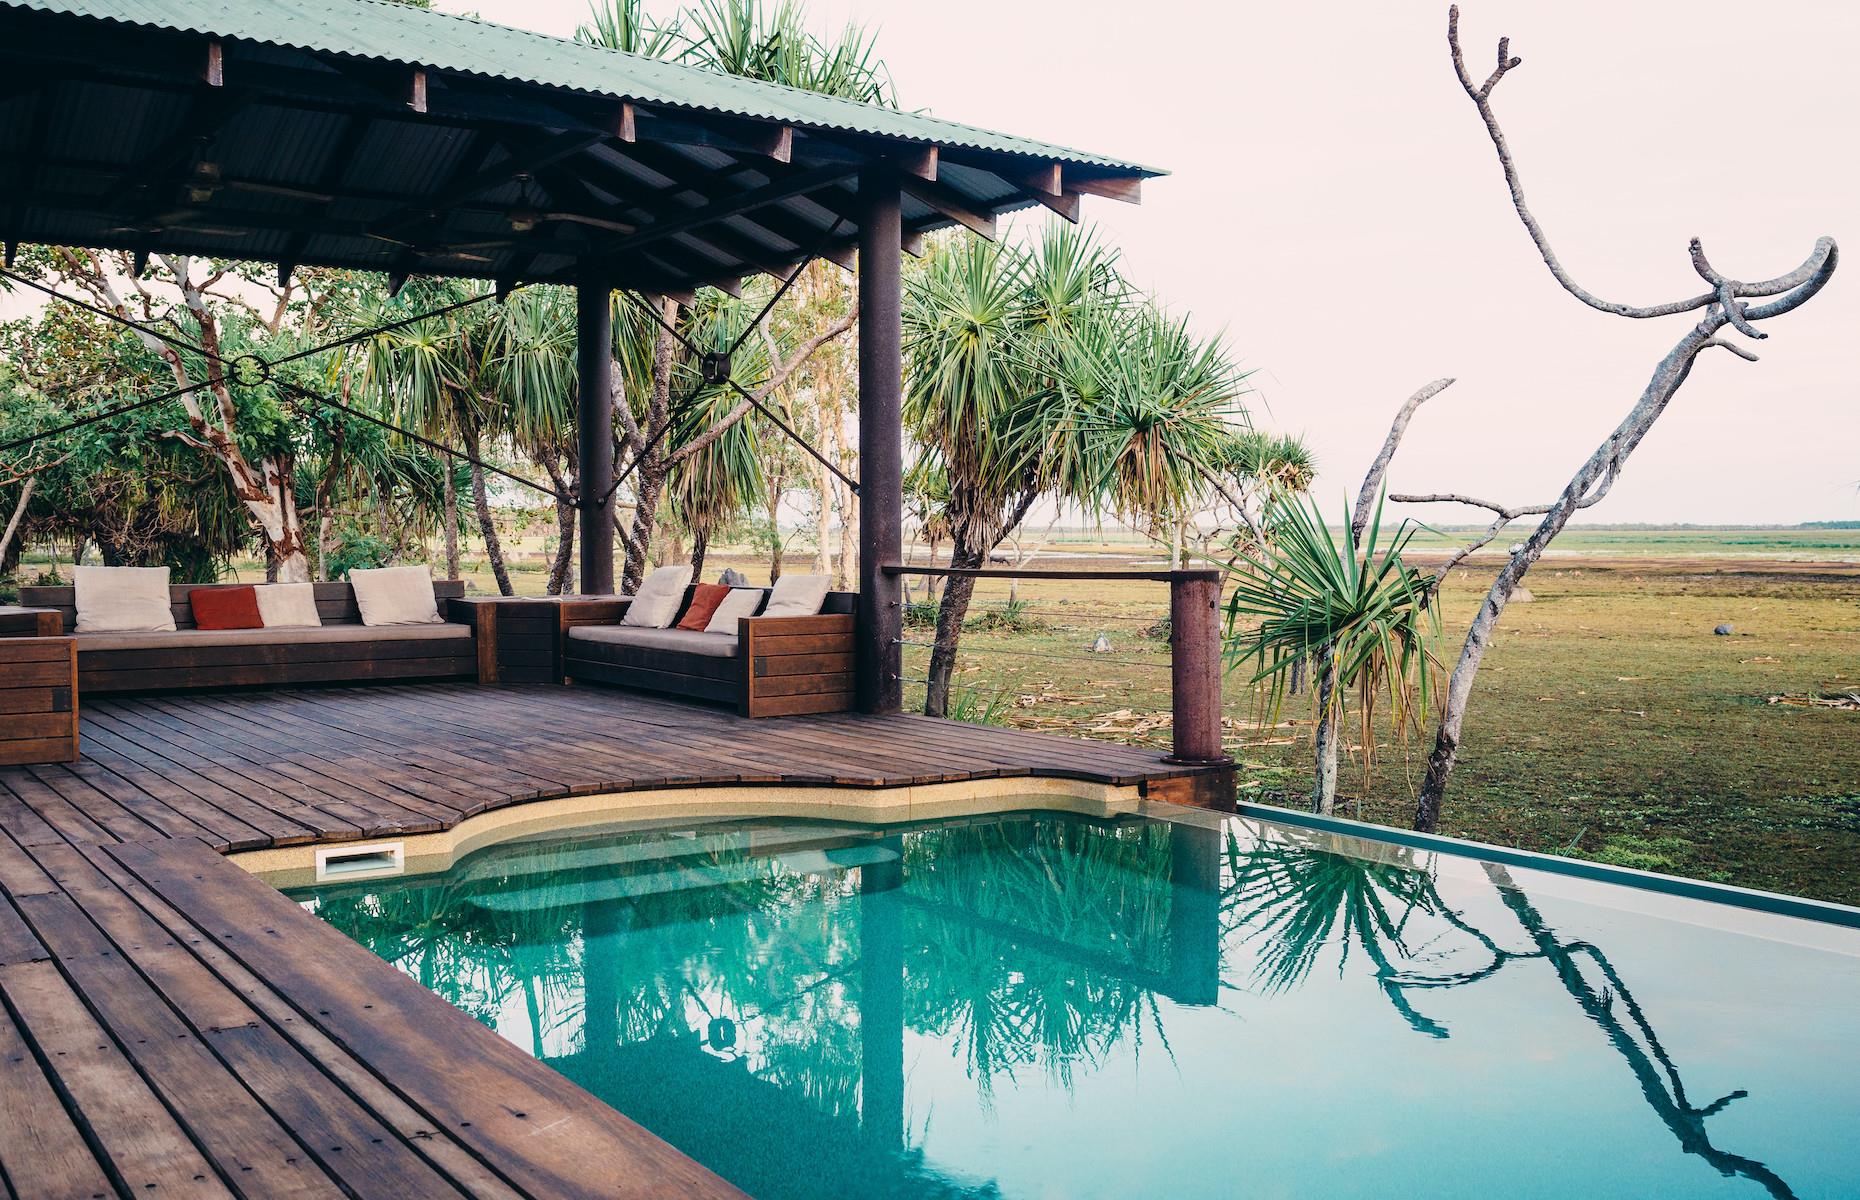 <p>A water buffalo farm in the steamy tropical wetlands of the Northern Territory may not scream luxury but <a href="https://www.bamurruplains.com/bamurru-plains-lodge/">Bamurru Plains</a> is just that. A high-end safari-style camp run by the Wild Bush Luxury group, it has 10 gorgeous bungalow tents where guests can luxuriate and immerse themselves in one of Australia’s most remote areas. Days can be spent poolside or zipping about the wetlands on airboats, spotting crocodiles and birds or fishing. You can also head off on a helicopter flight into Arnhem Land to marvel at age-old rock art. </p>